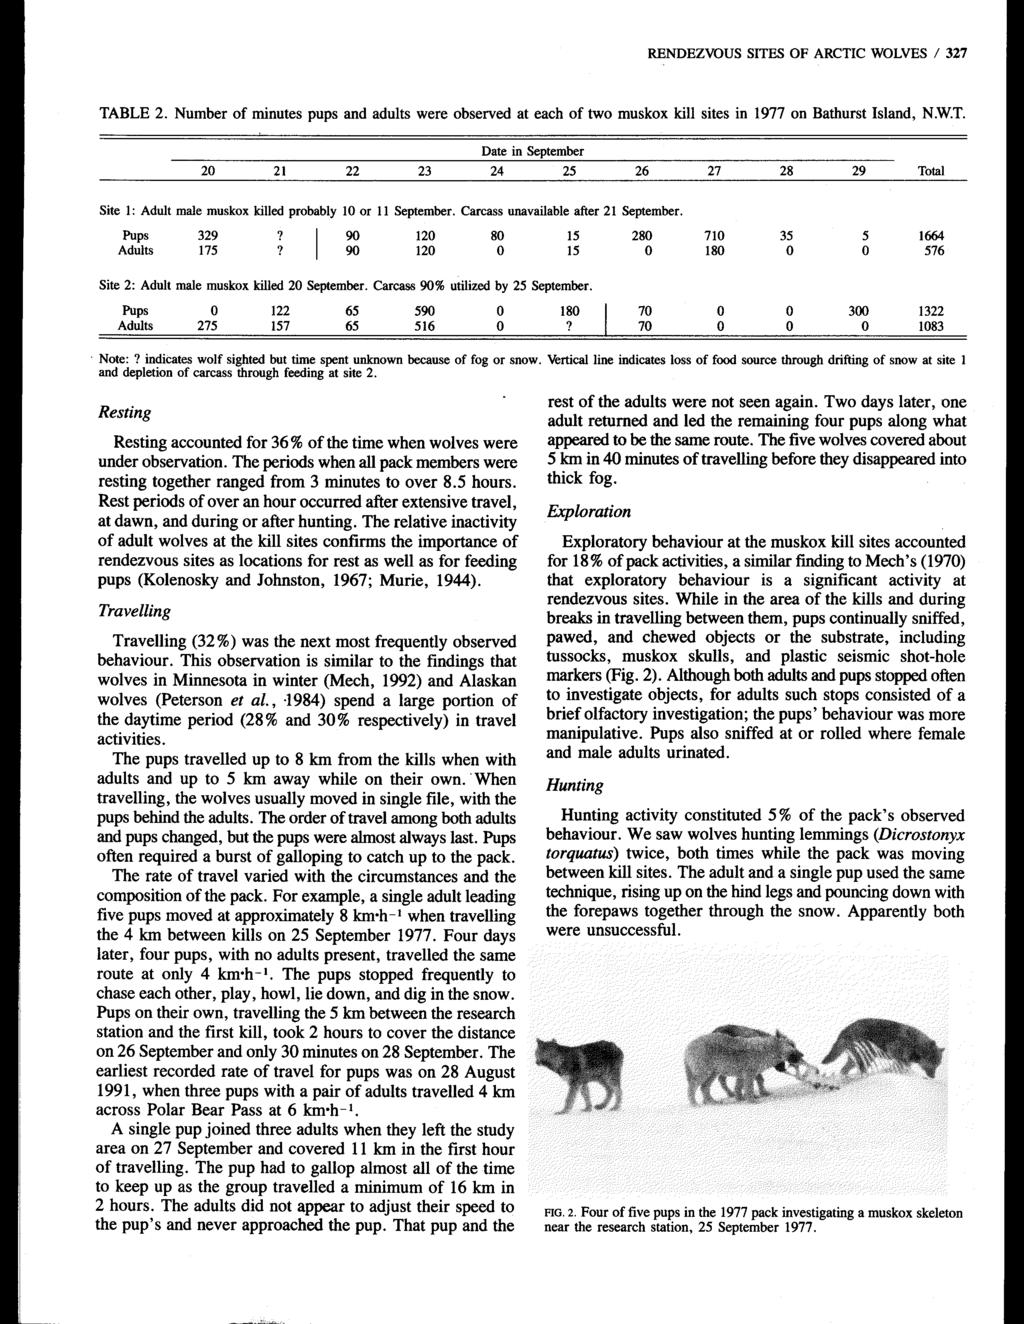 RENDEZVOUS SITES OF ARCTICWOLVES / 327 TABLE 2. Number of minutes pups and adults were observed at each of two muskox kill sites in 1977 on Bathurst Island, N.W.T. Date in September 25 24 20 23 21 22 Total Site 1: Adult male muskox killed probably 10 or 11 September.